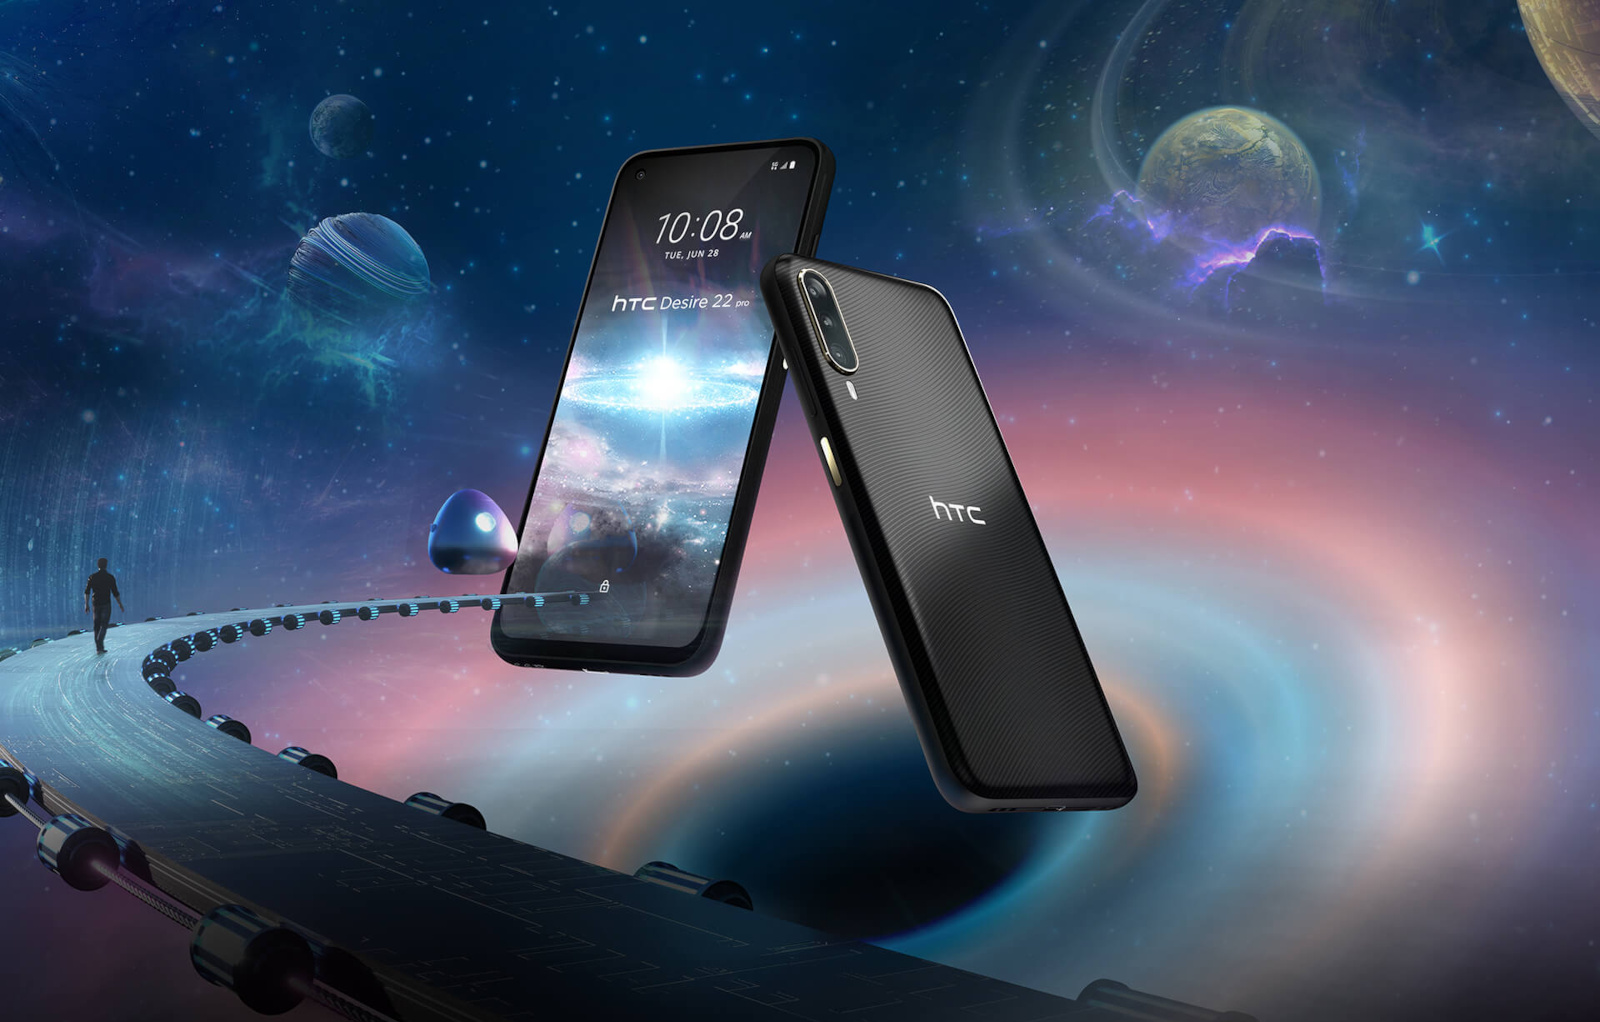 HTC’s first new phone this year is the metaverse-focused Desire 22 Pro